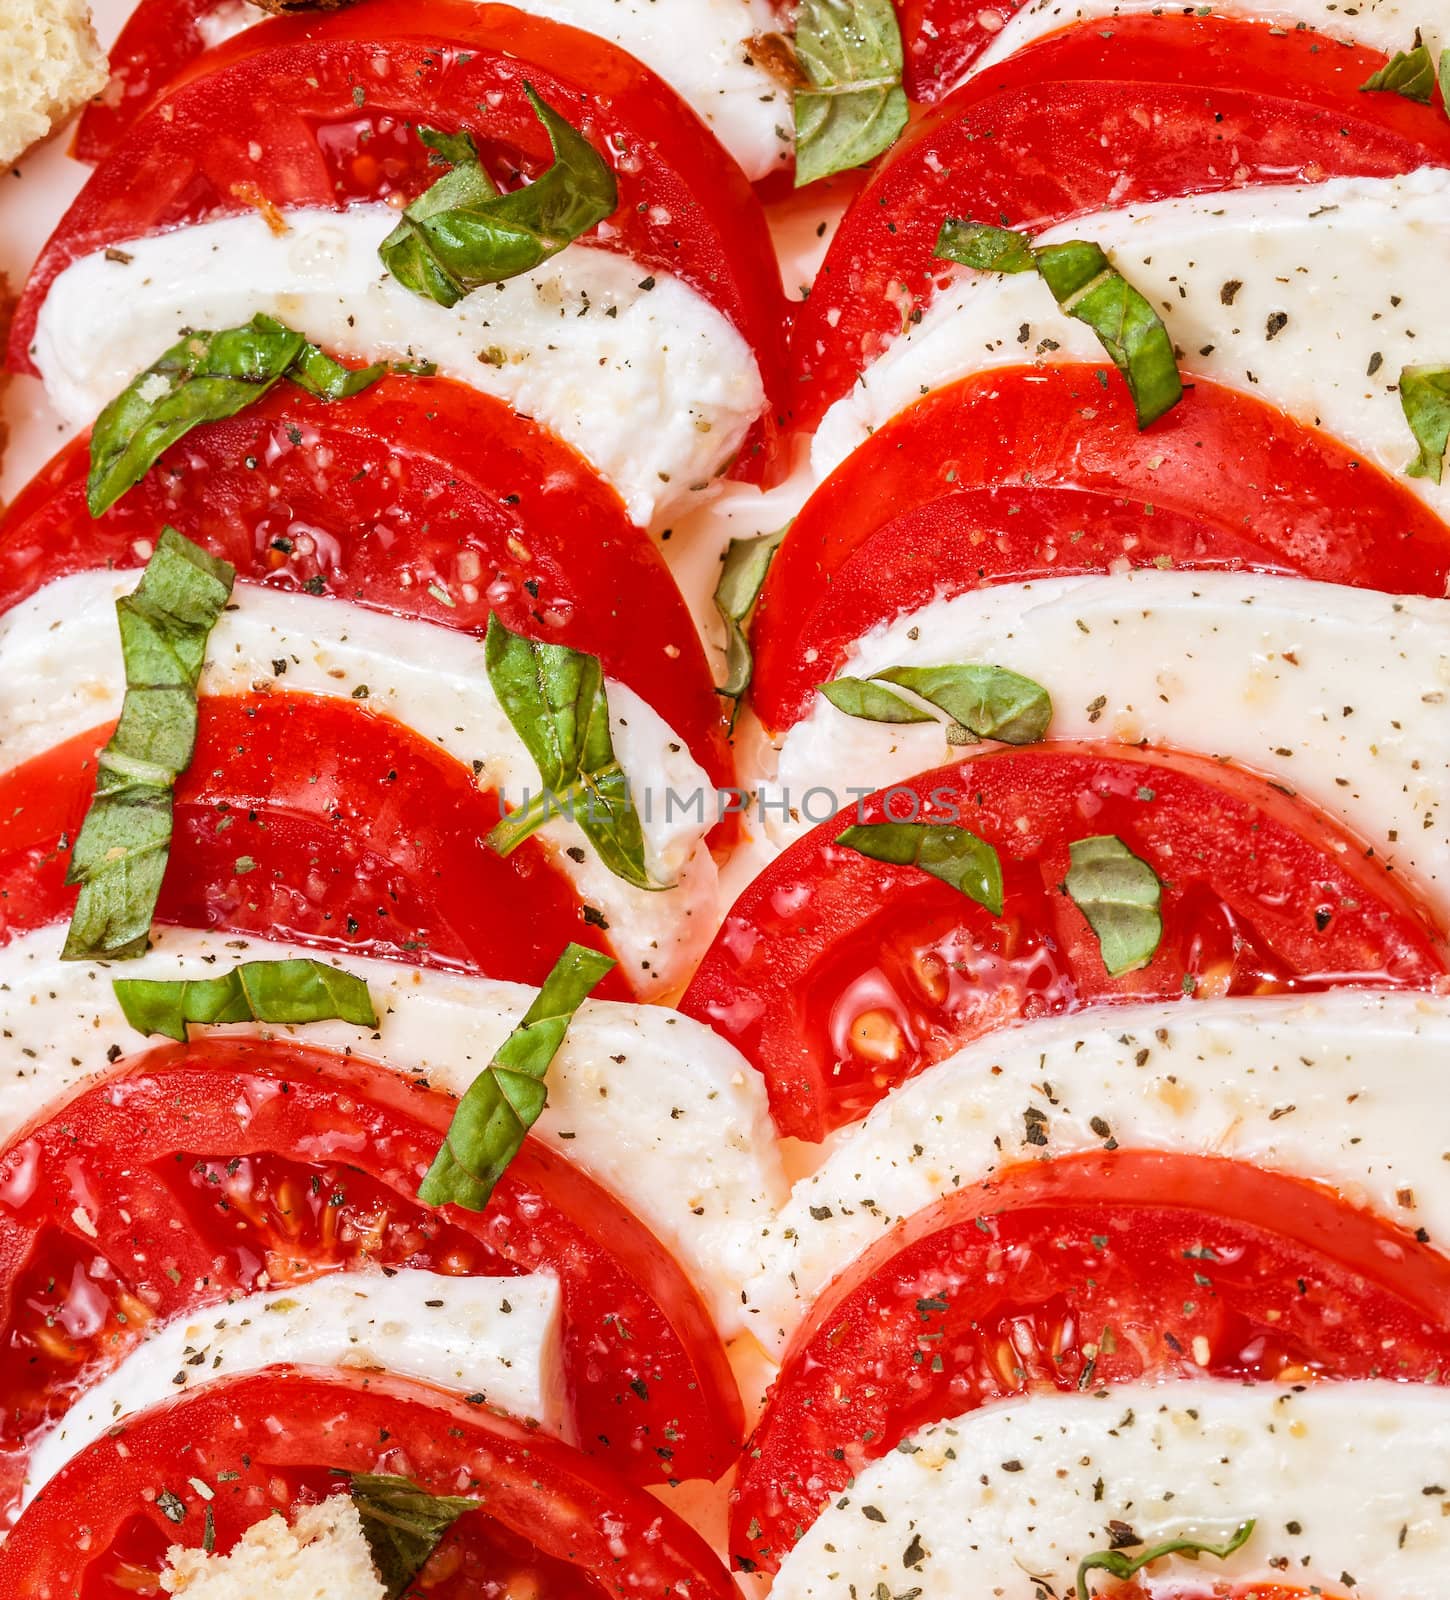 Tomato and mozzarella slices  with basil leaves